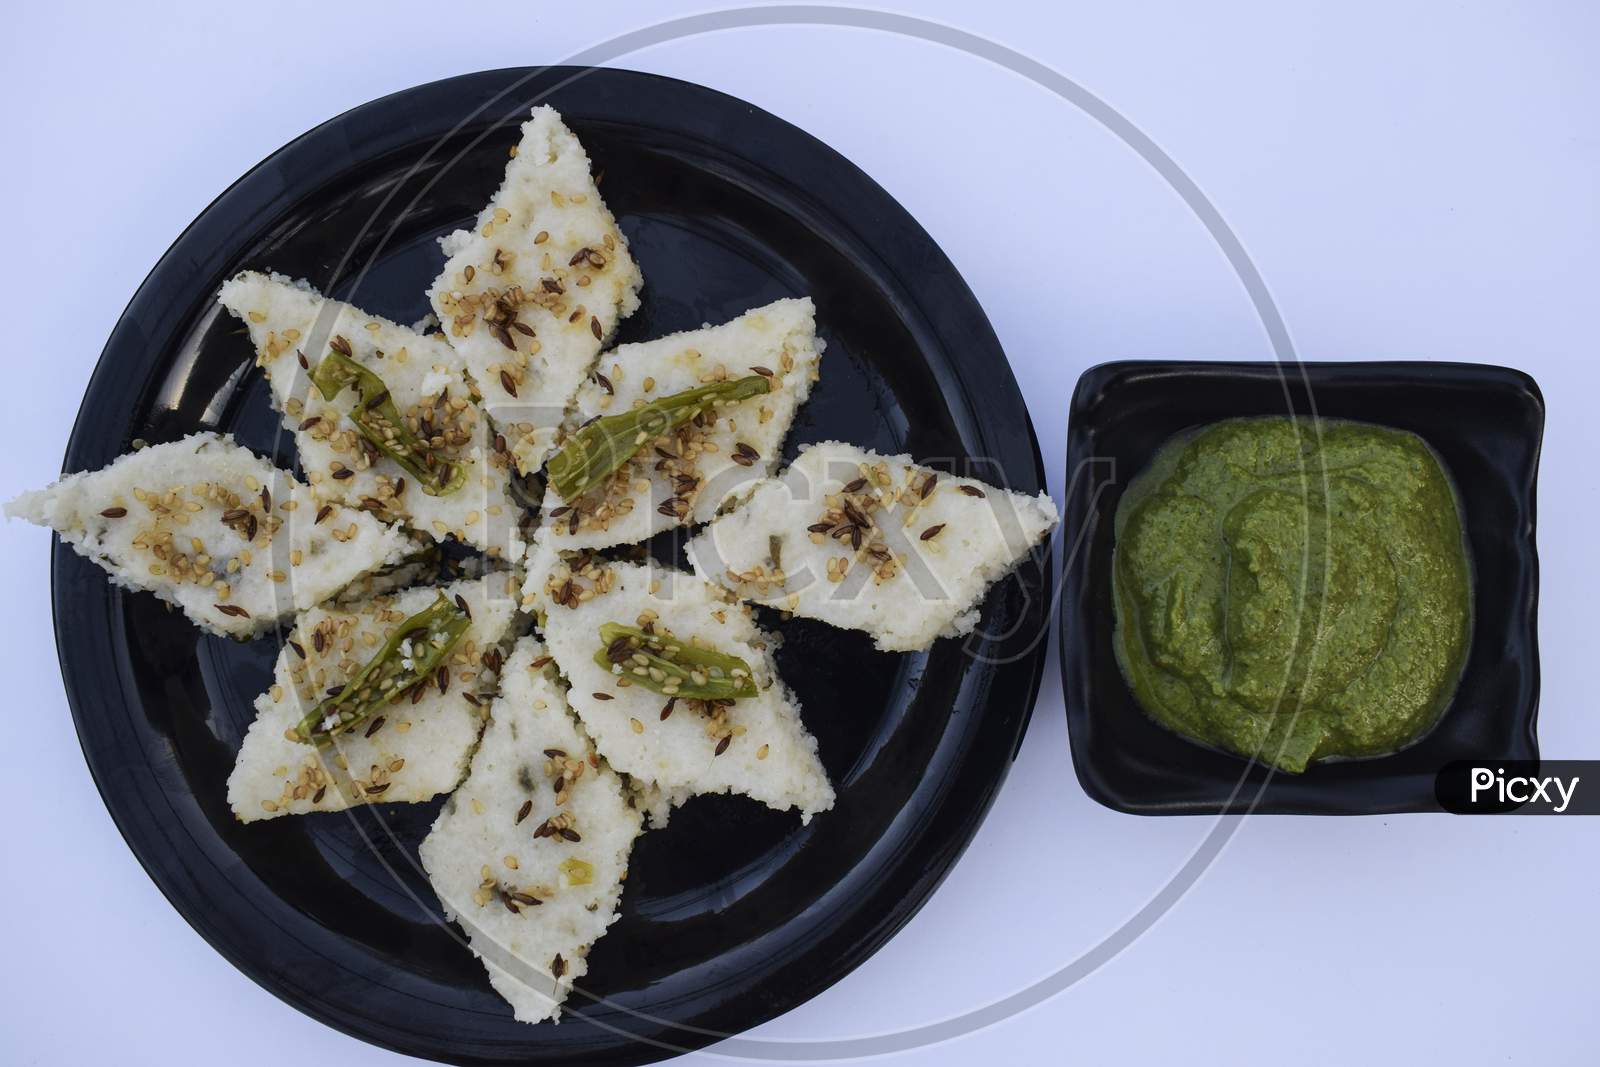 Vrat Ka Khana Farali Gujarati Cuisine. Faral Ka White Dhokla Made From Sago Flour And Garnished With Green Chilly And Sesame Seeds. Eaten During Vrat Upawas Fasting Food From Gujarat India.